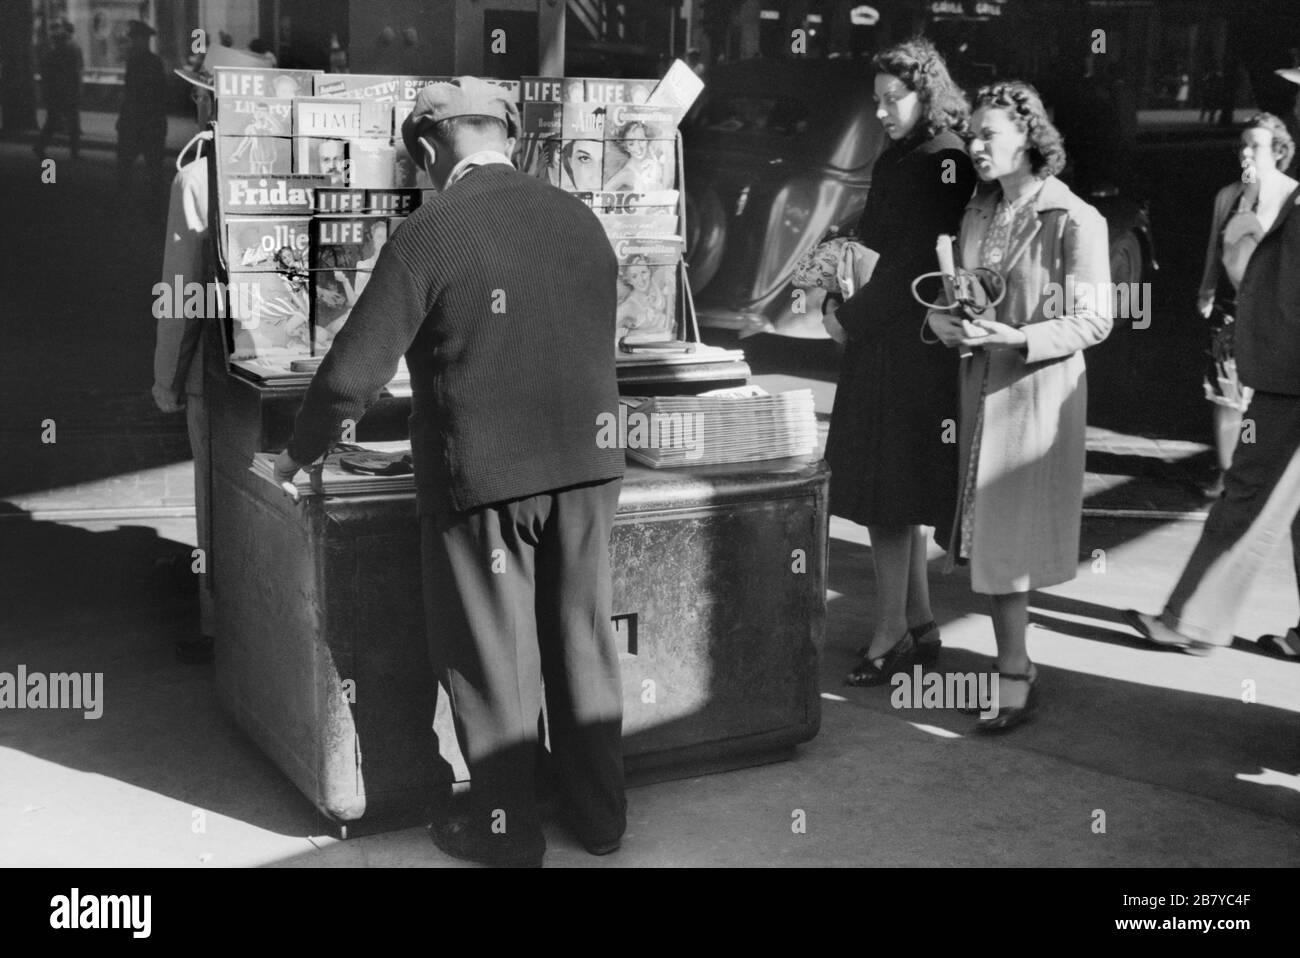 Newsstand, Chicago, Illinois, USA, John Vachon for U.S. Farm Security Administration, July 1940 Stock Photo